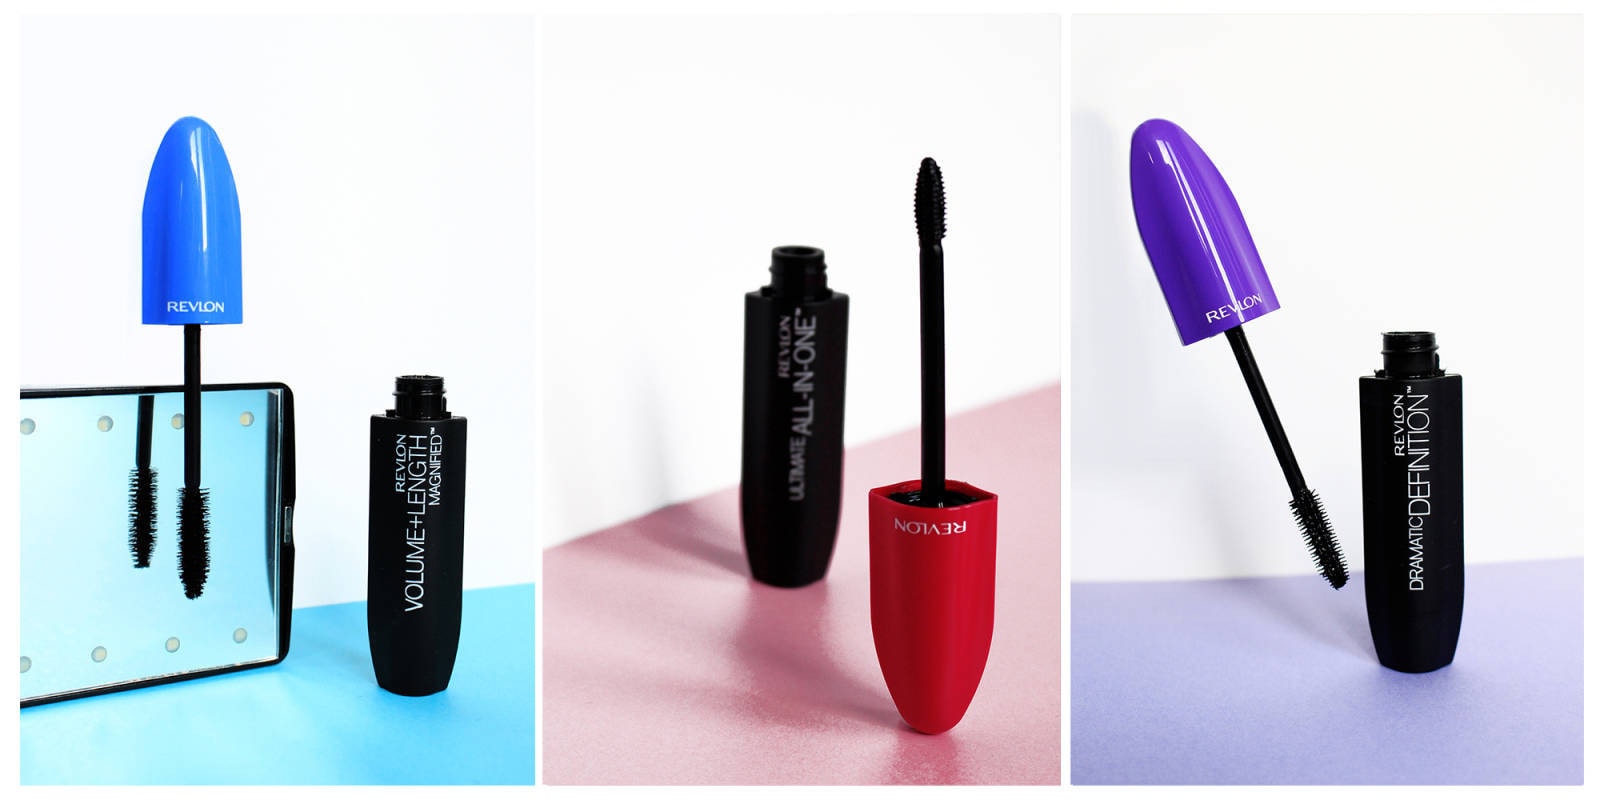 New Revlon Decoded Mascara Collection 2016